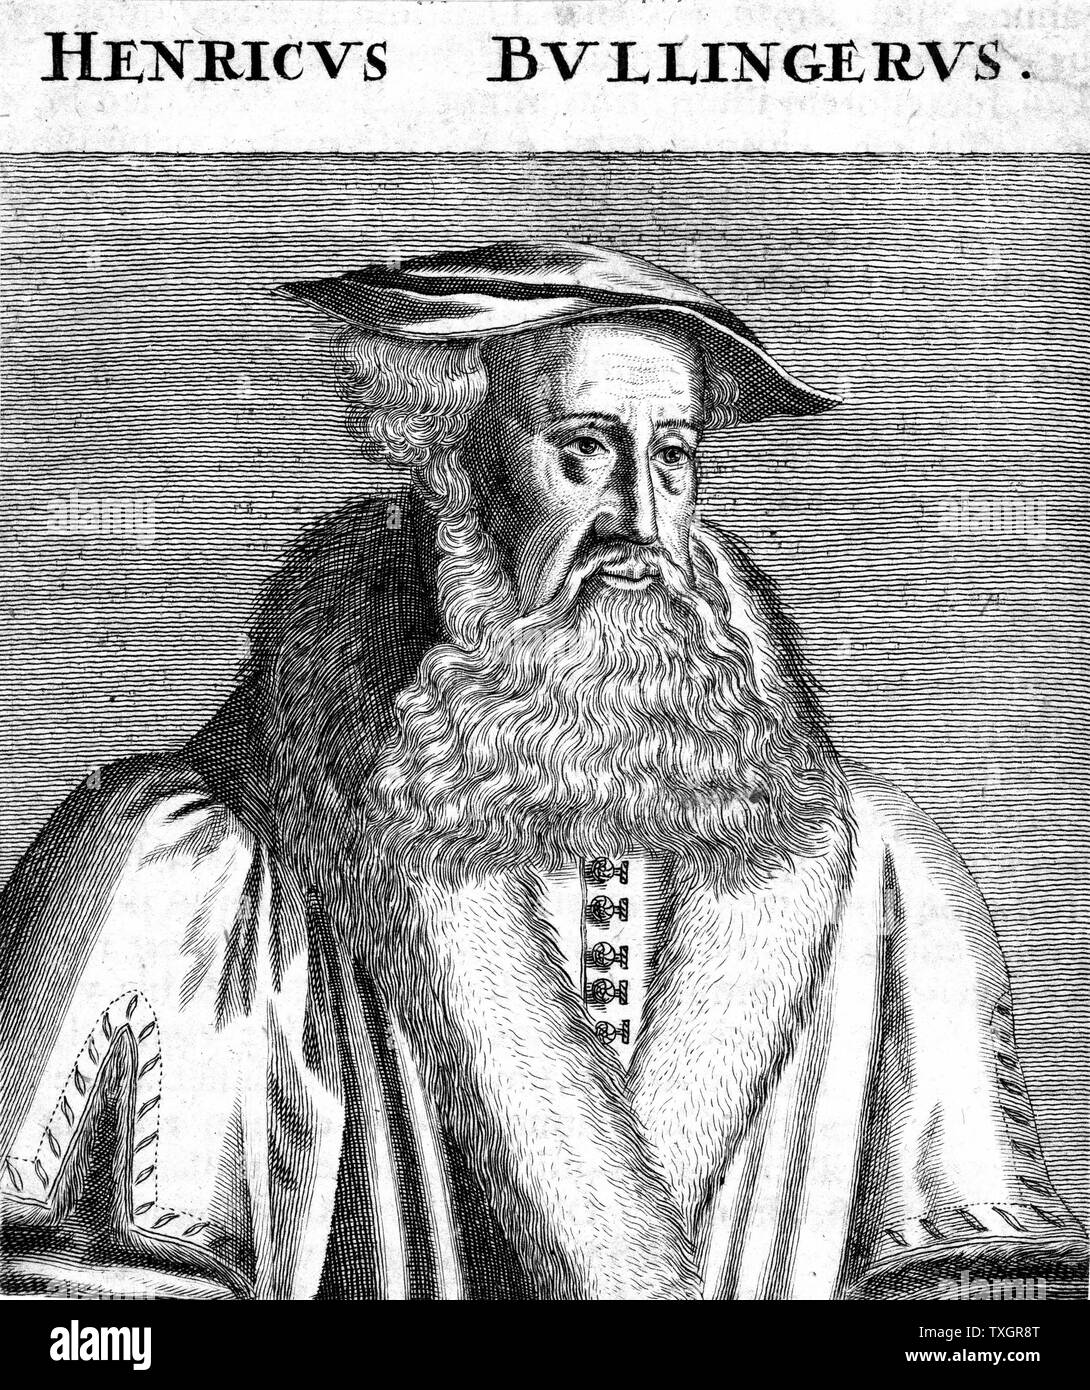 Heinrich Bullinger (1504-1575) Swiss Protestant Reformation divine. Successor to Zwingli. Copperplate engraving Stock Photo